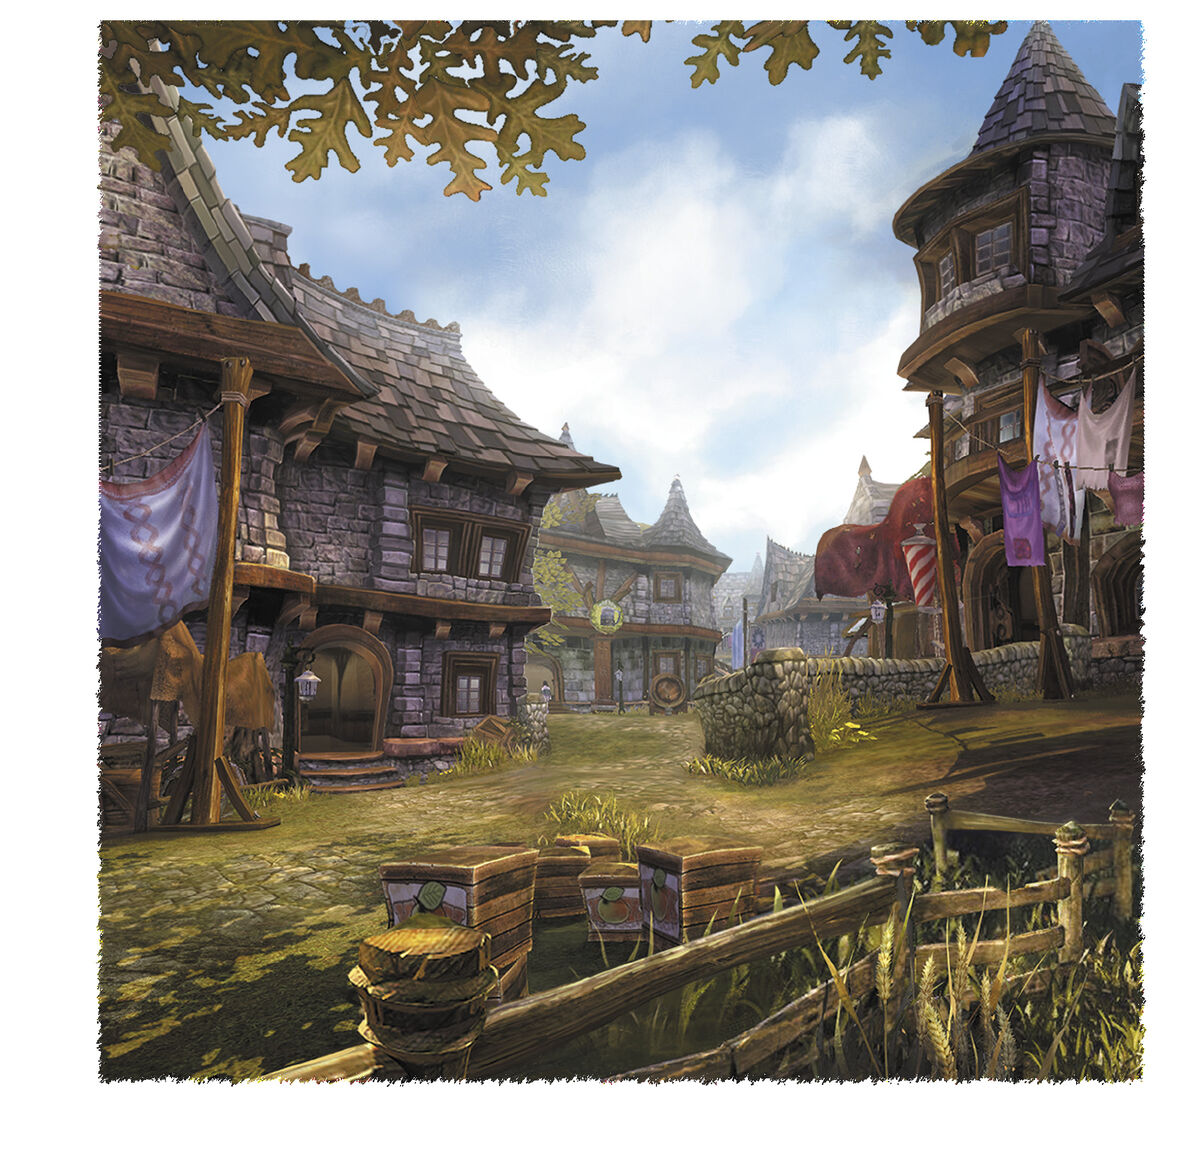 Fable cottage. Бауэрстоун Fable. Fable замок Бауэрстоун. Fable локации. Fable гавань.